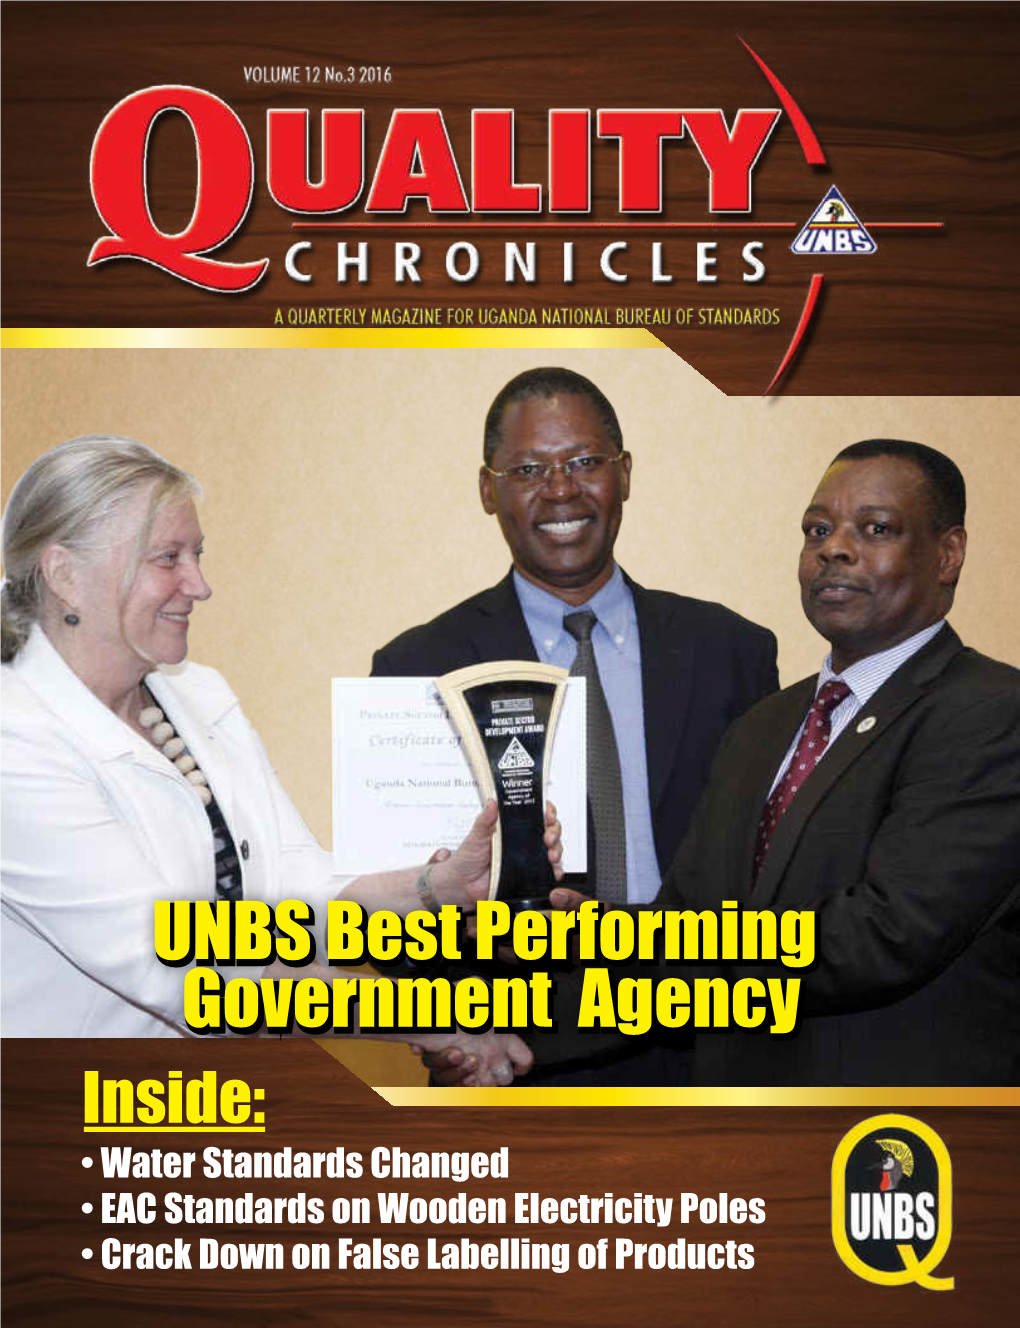 UNBS Best Performing Government Agency